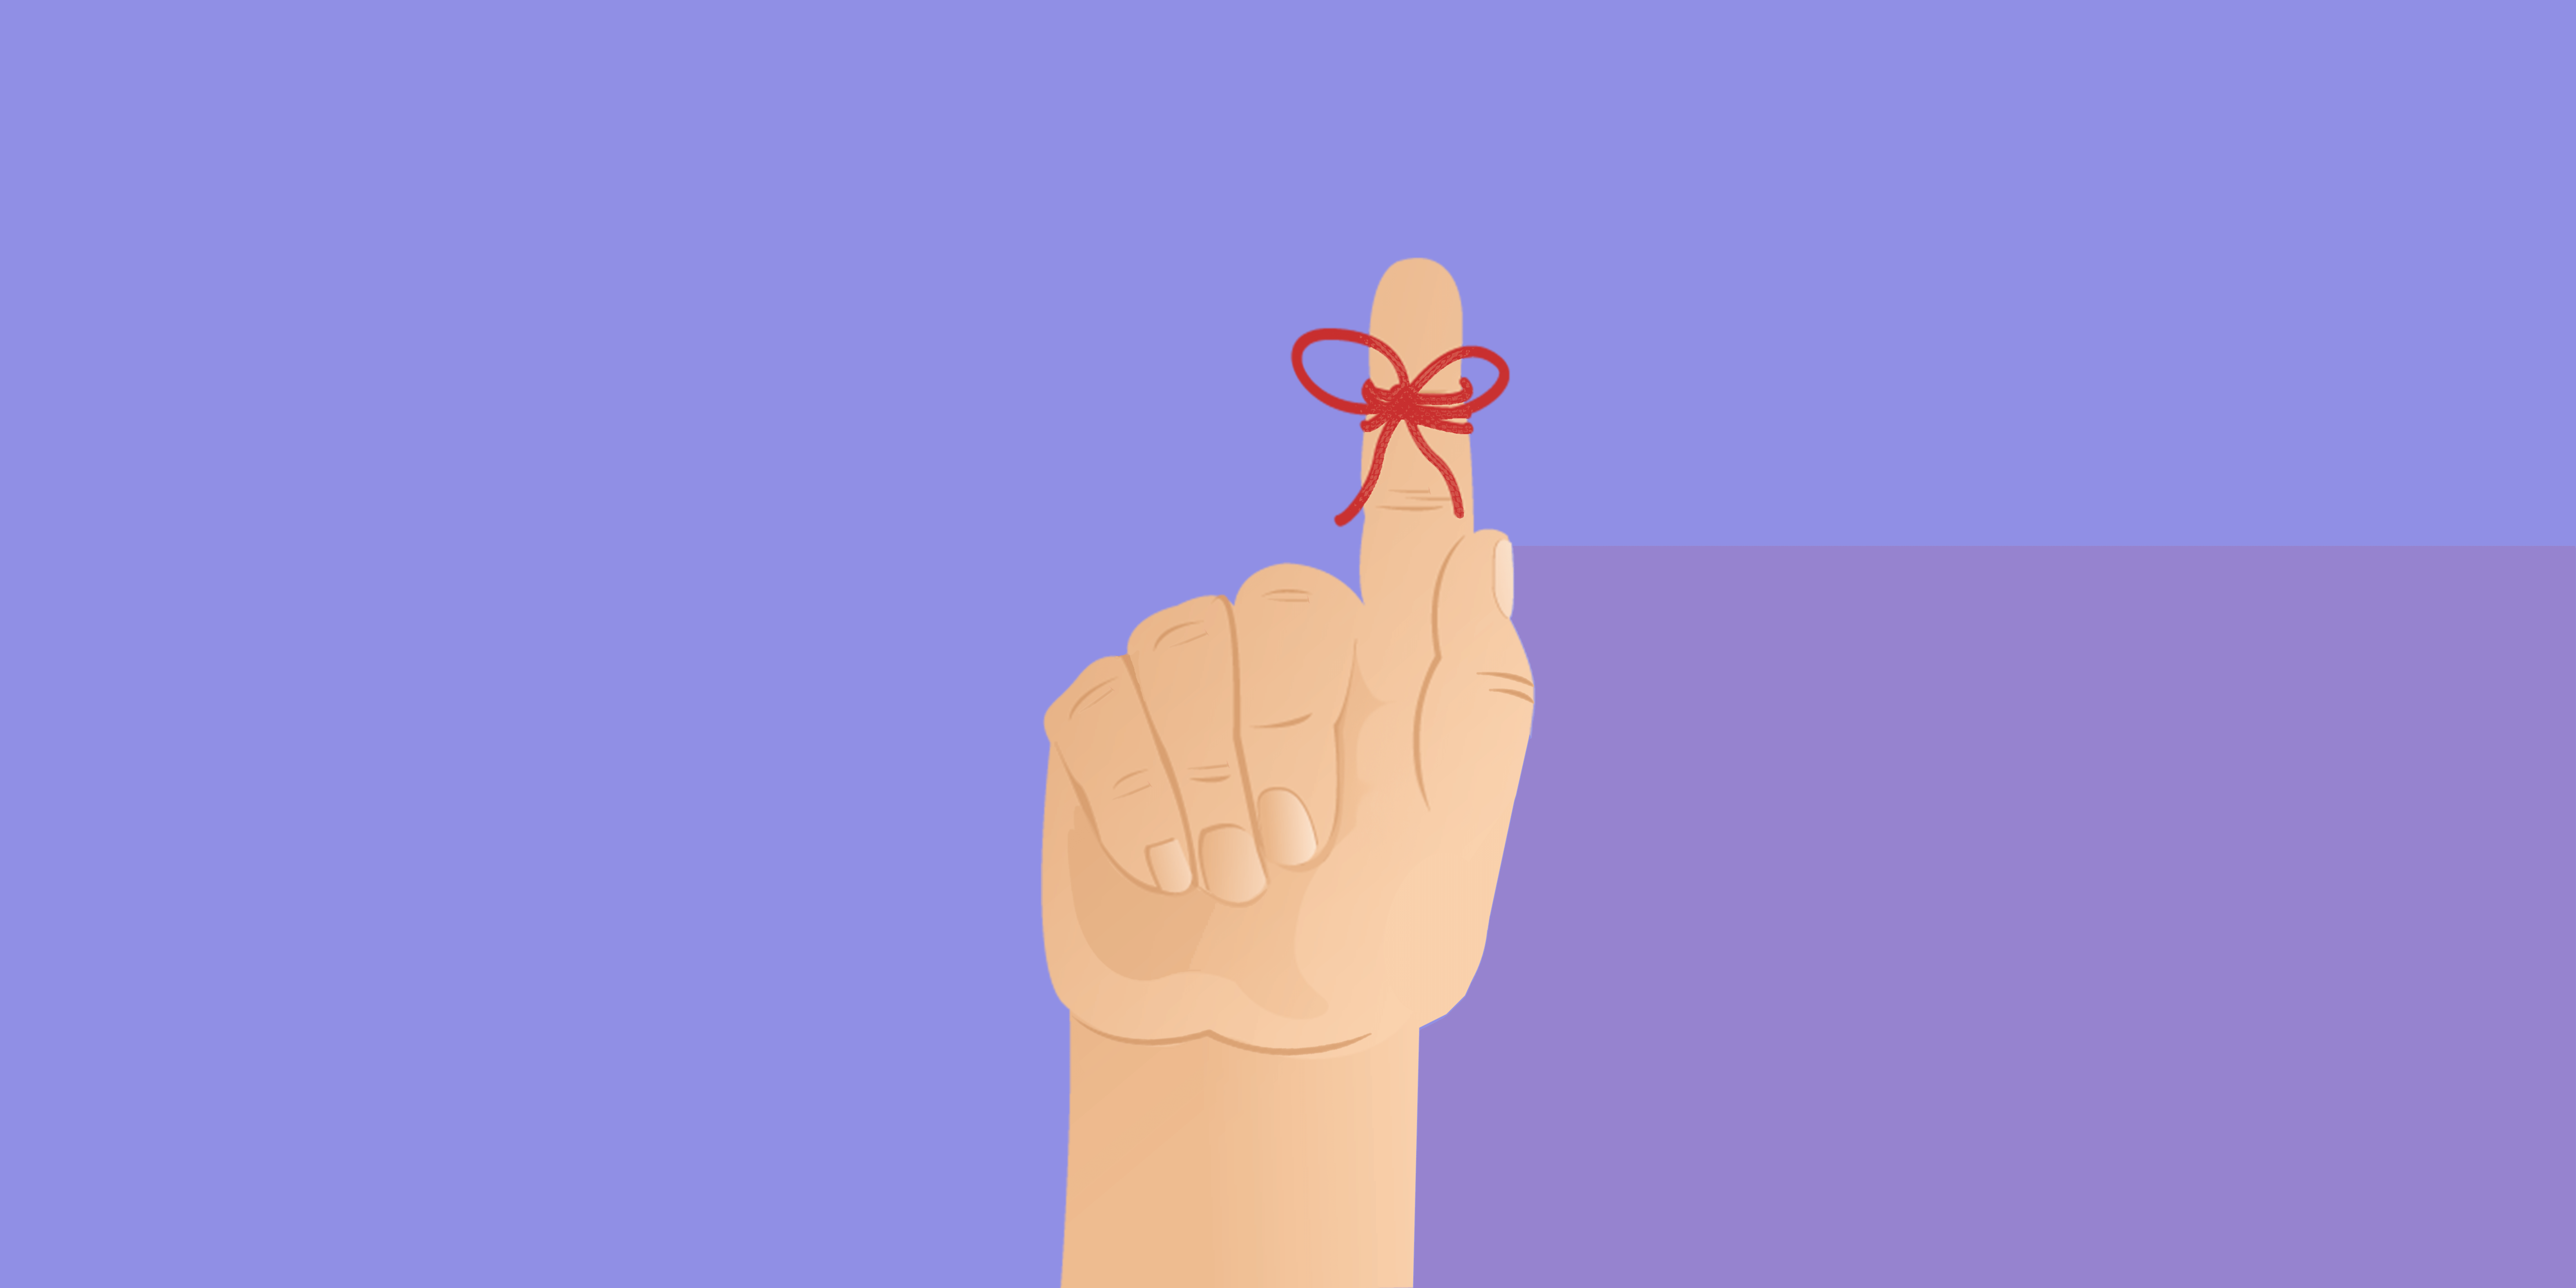 A hand with red string tied around the index finger